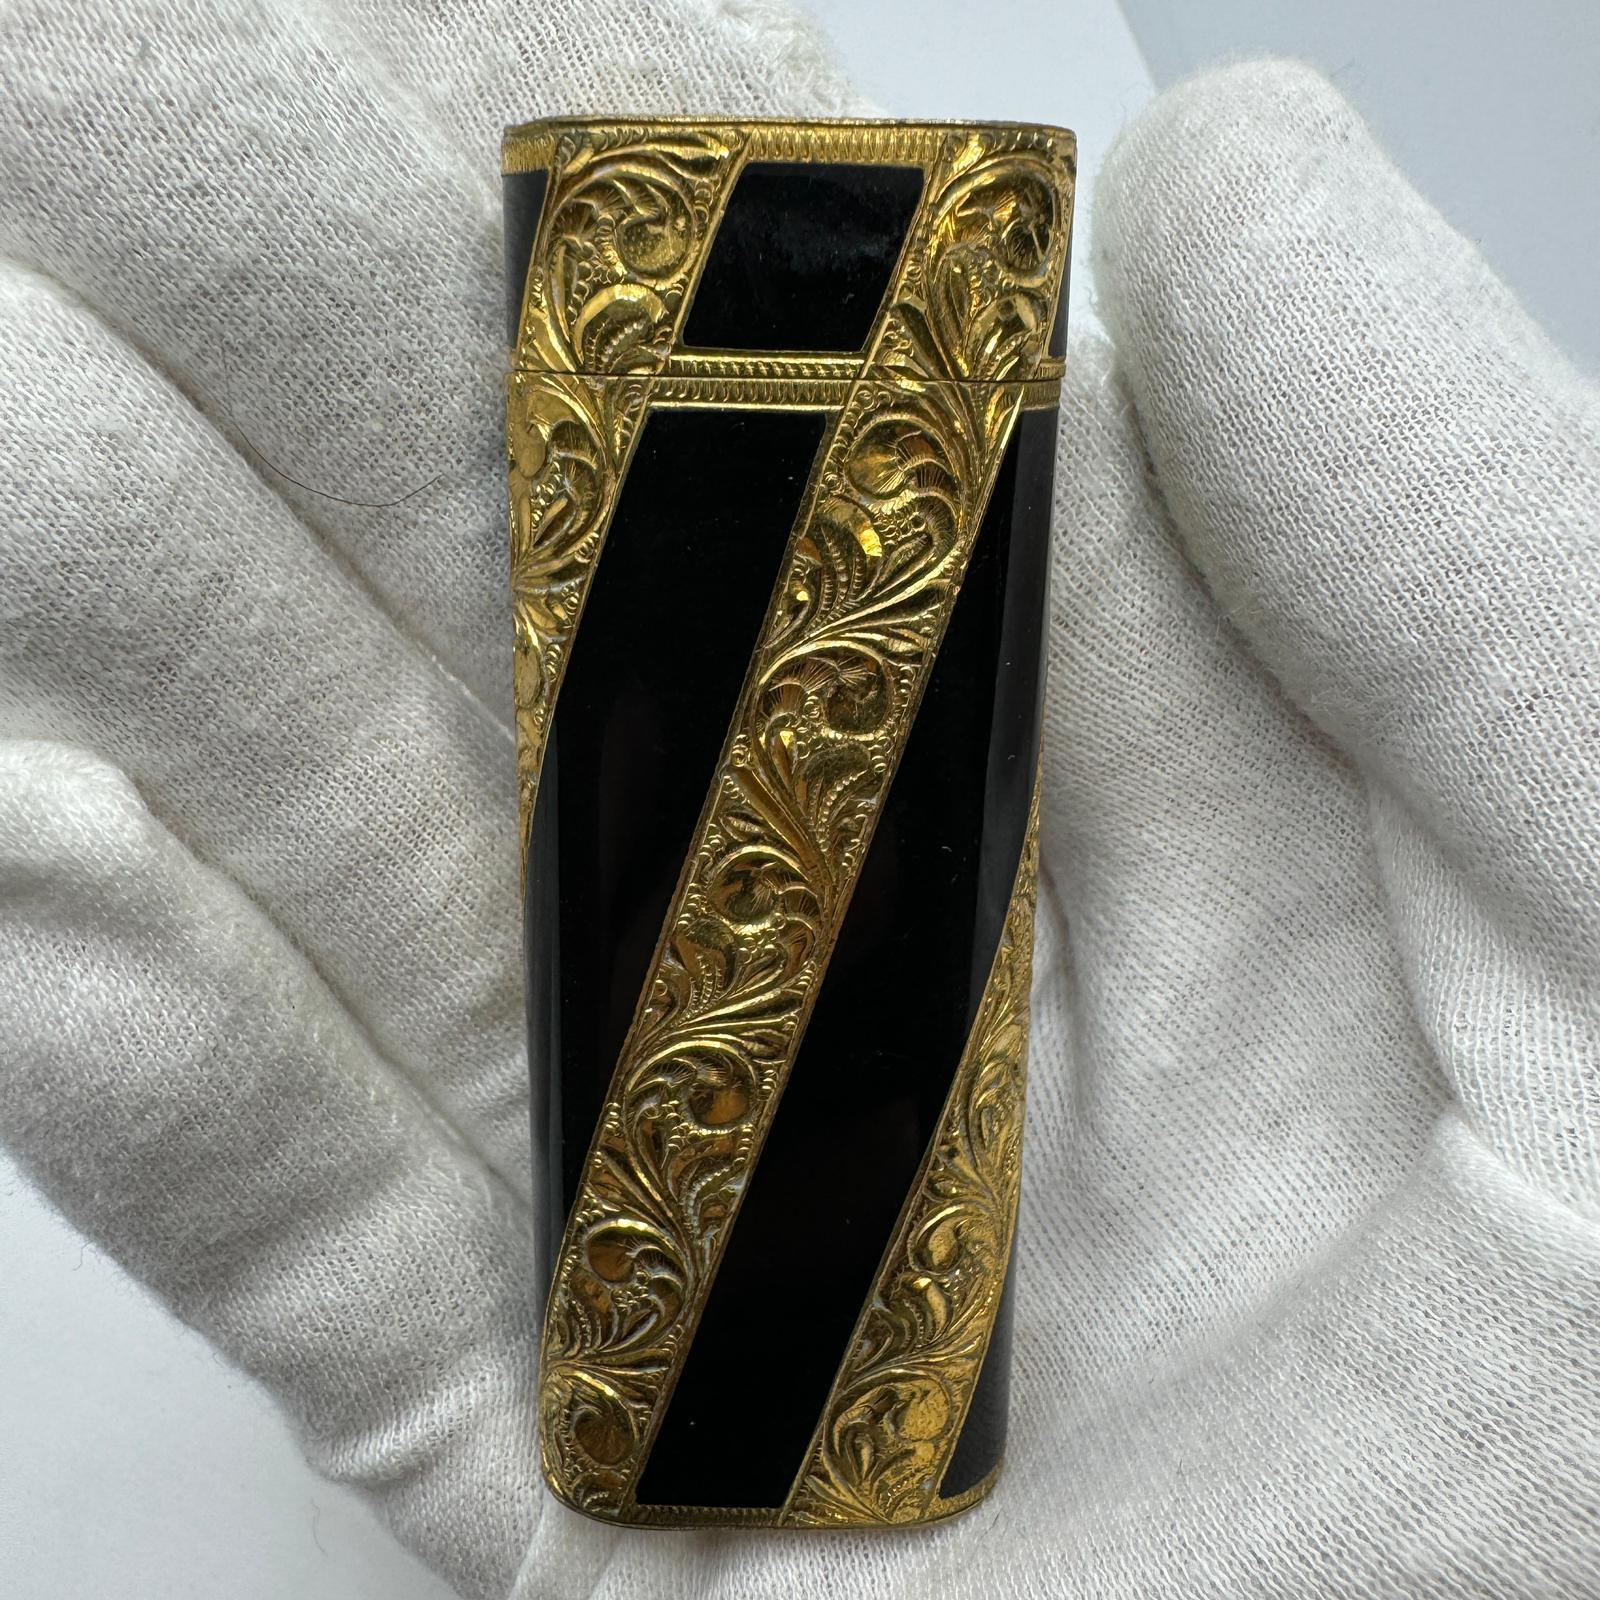 Rare Vintage Cartier circa 1980 18k Gold and Lacquer “Royking” Lighter For Sale 5